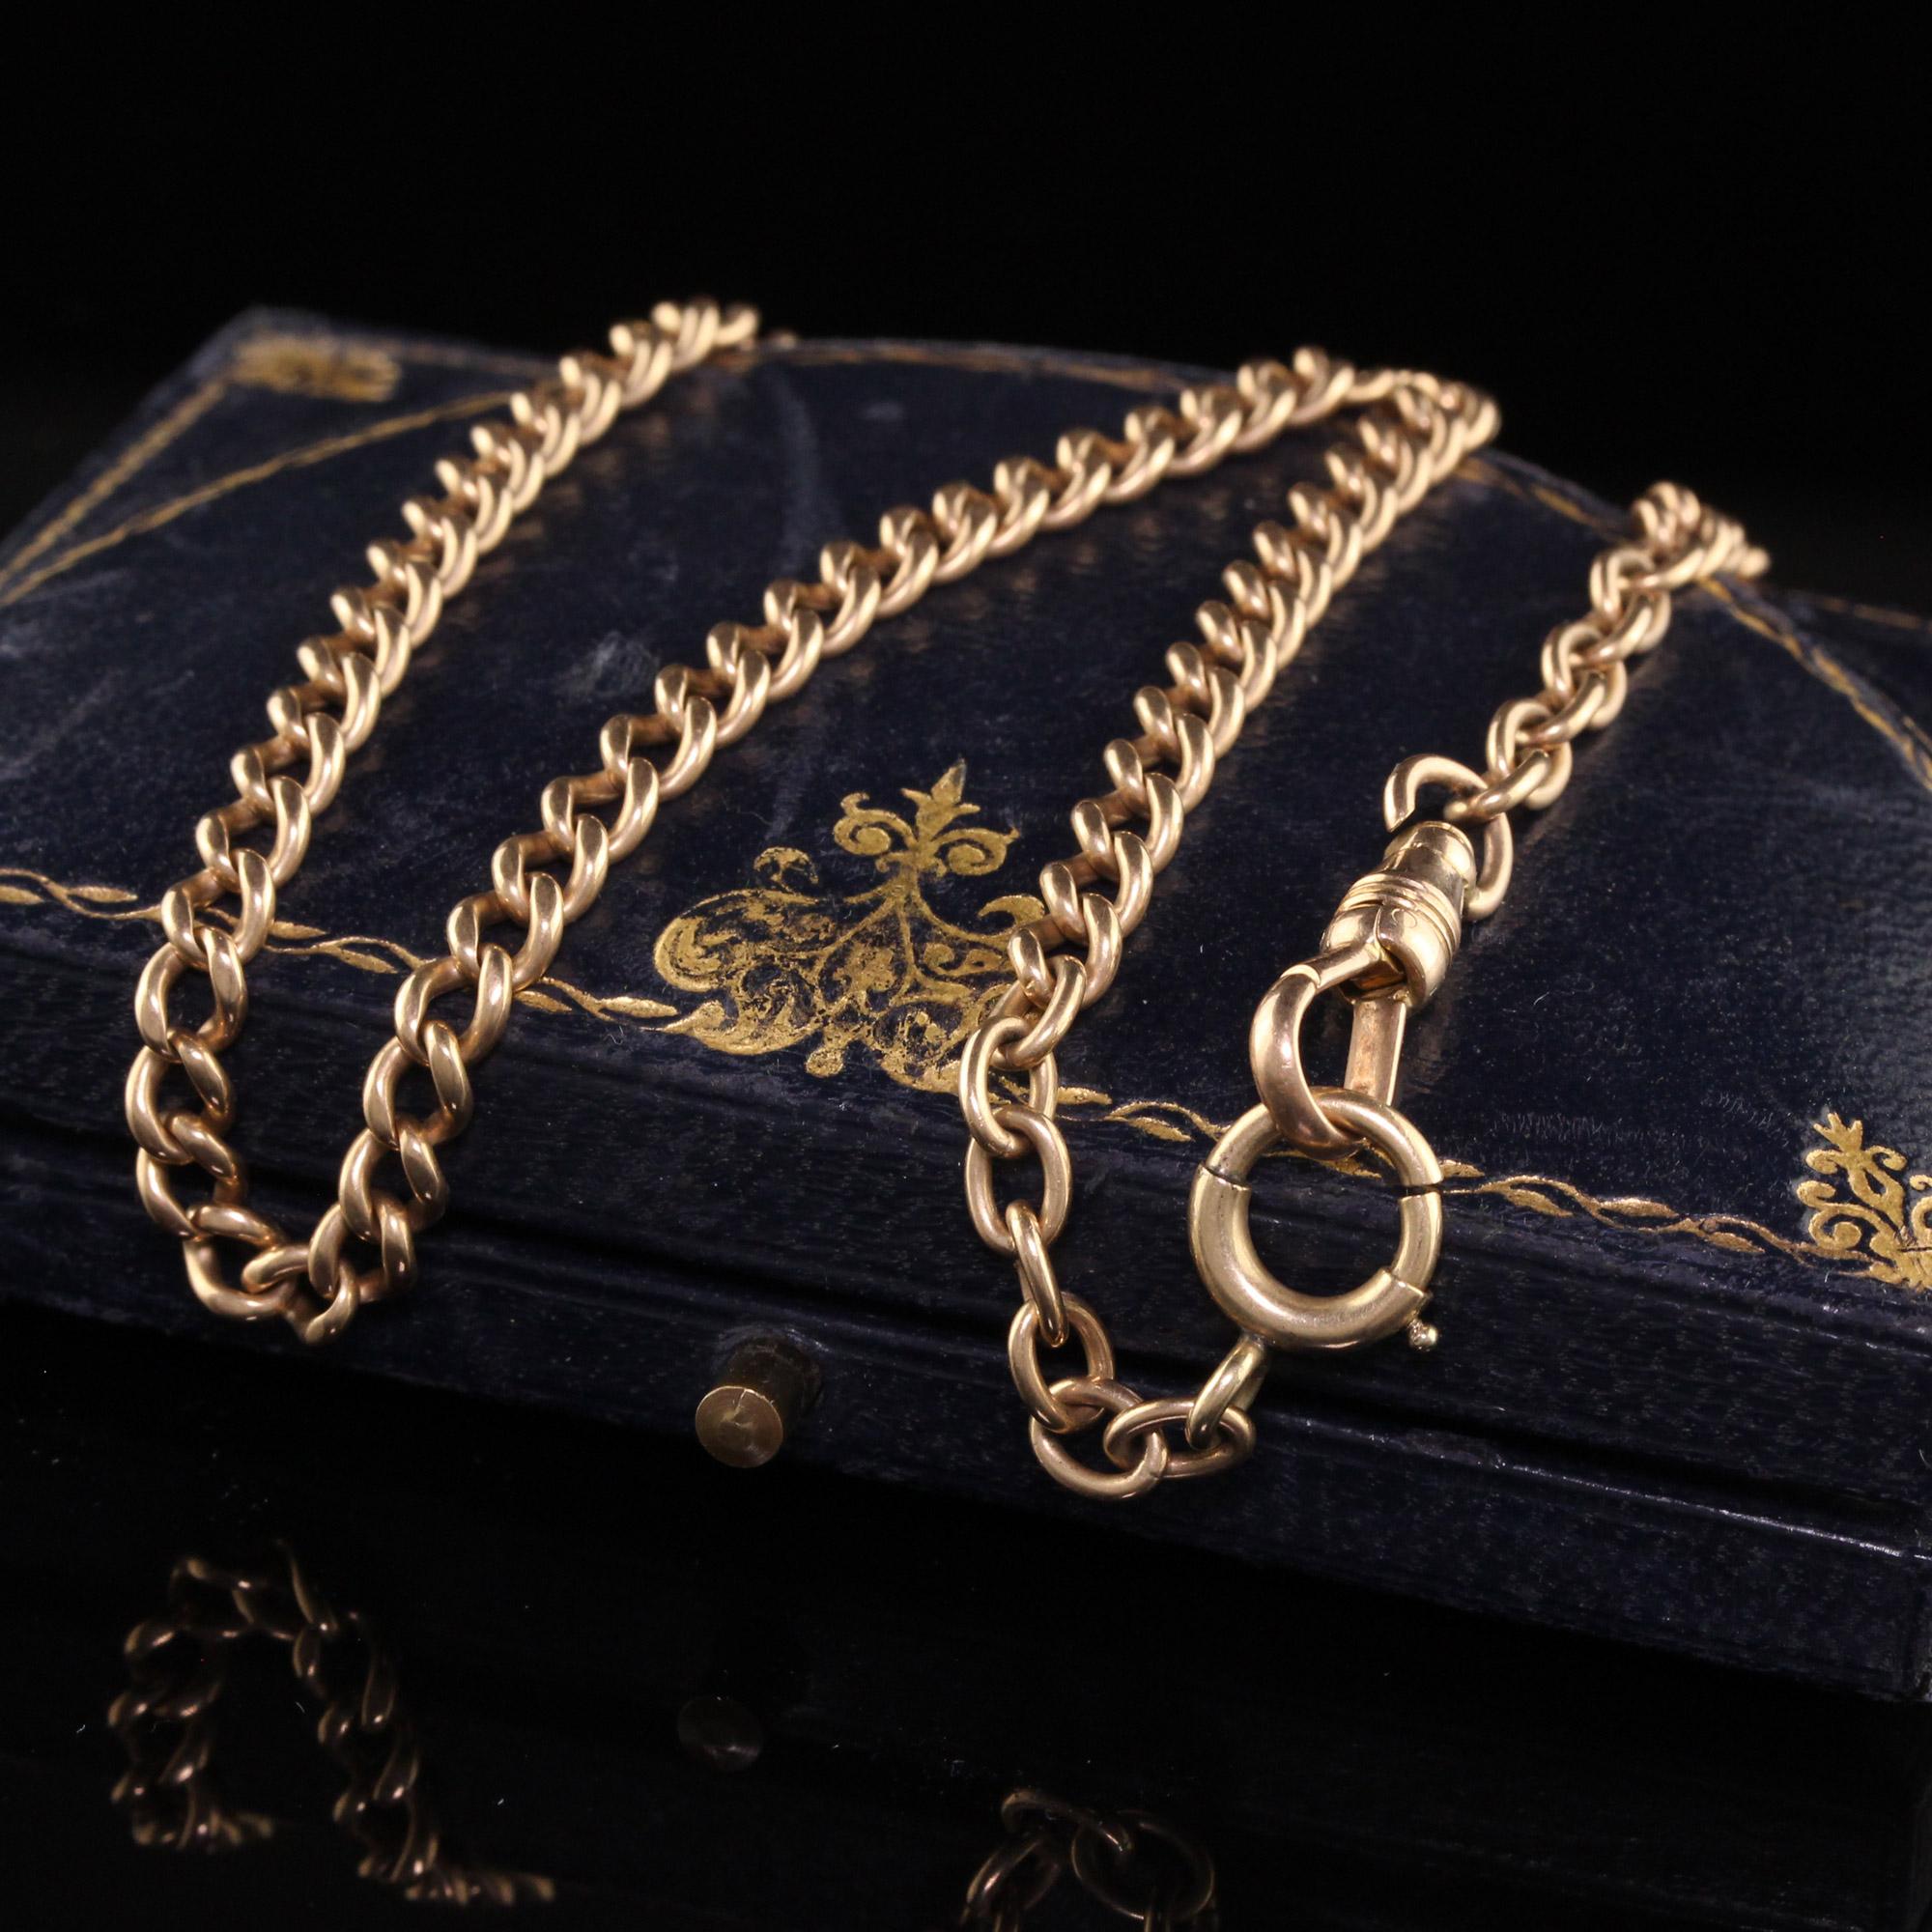 Beautiful Antique Art Deco 14K Yellow Gold Cuban Link Watch Fob Necklace. This classic necklace is crafted in 14k yellow gold. The necklace is in great condition and has a beautiful dark gold patina on it that make it look slightly rosy in color.